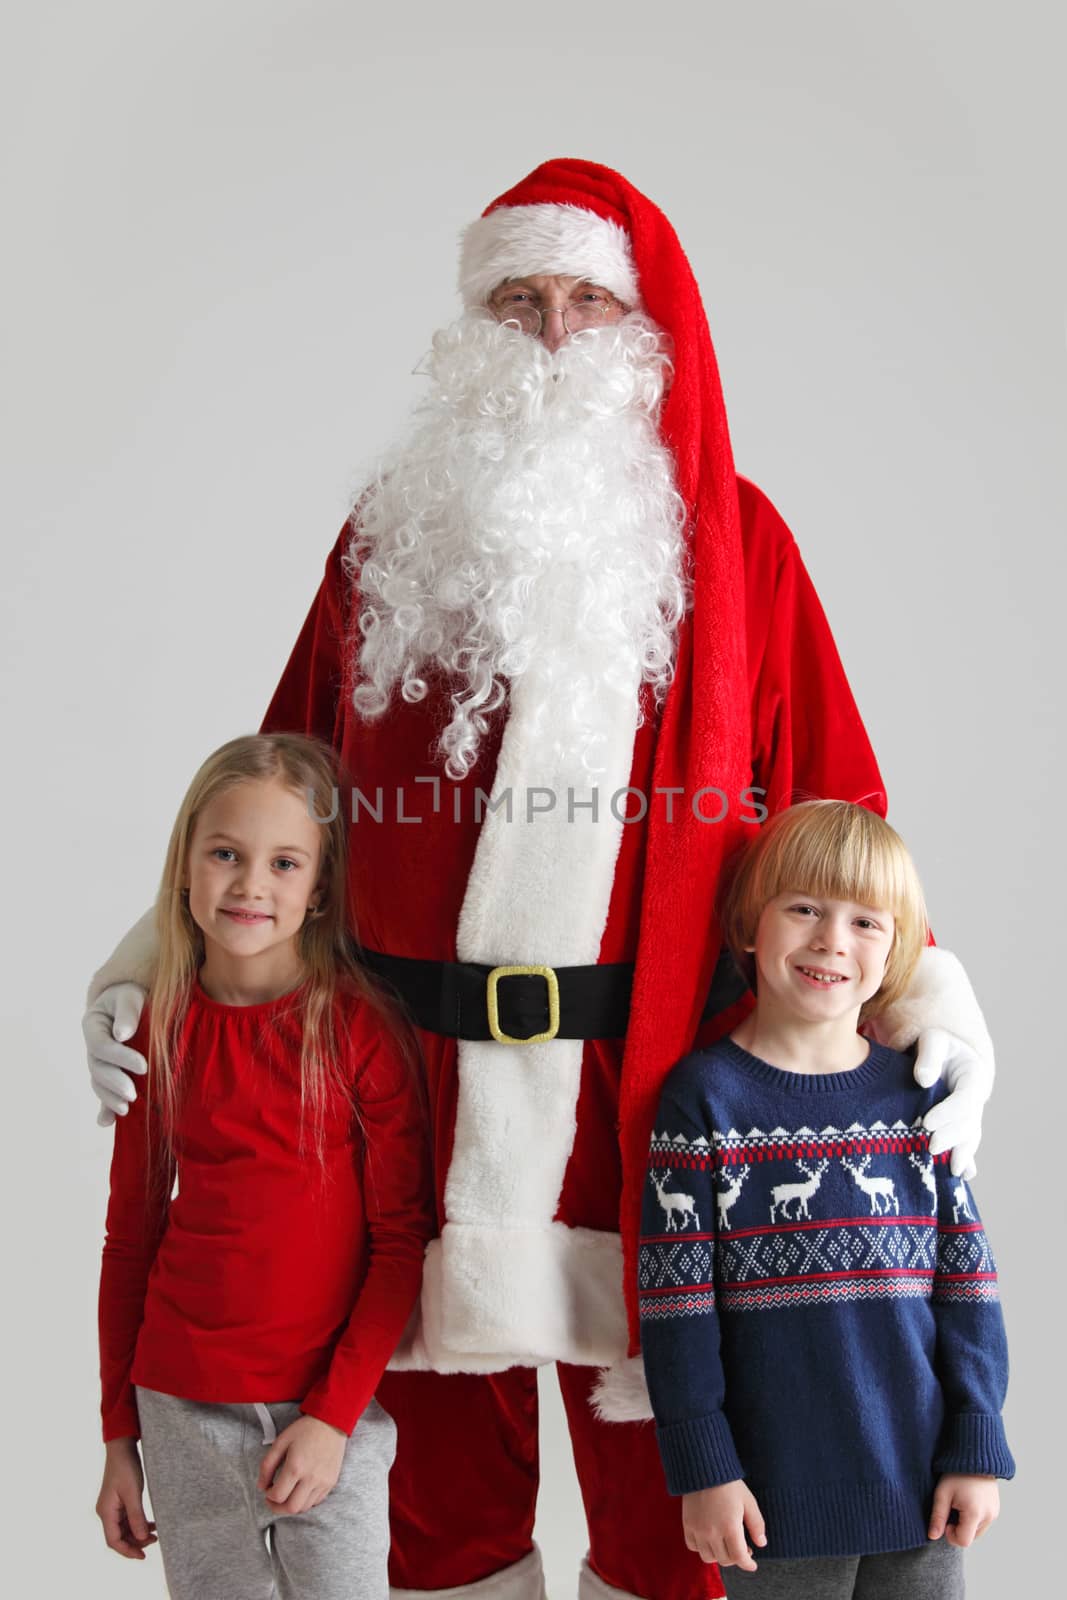 Children and Santa Claus by ALotOfPeople